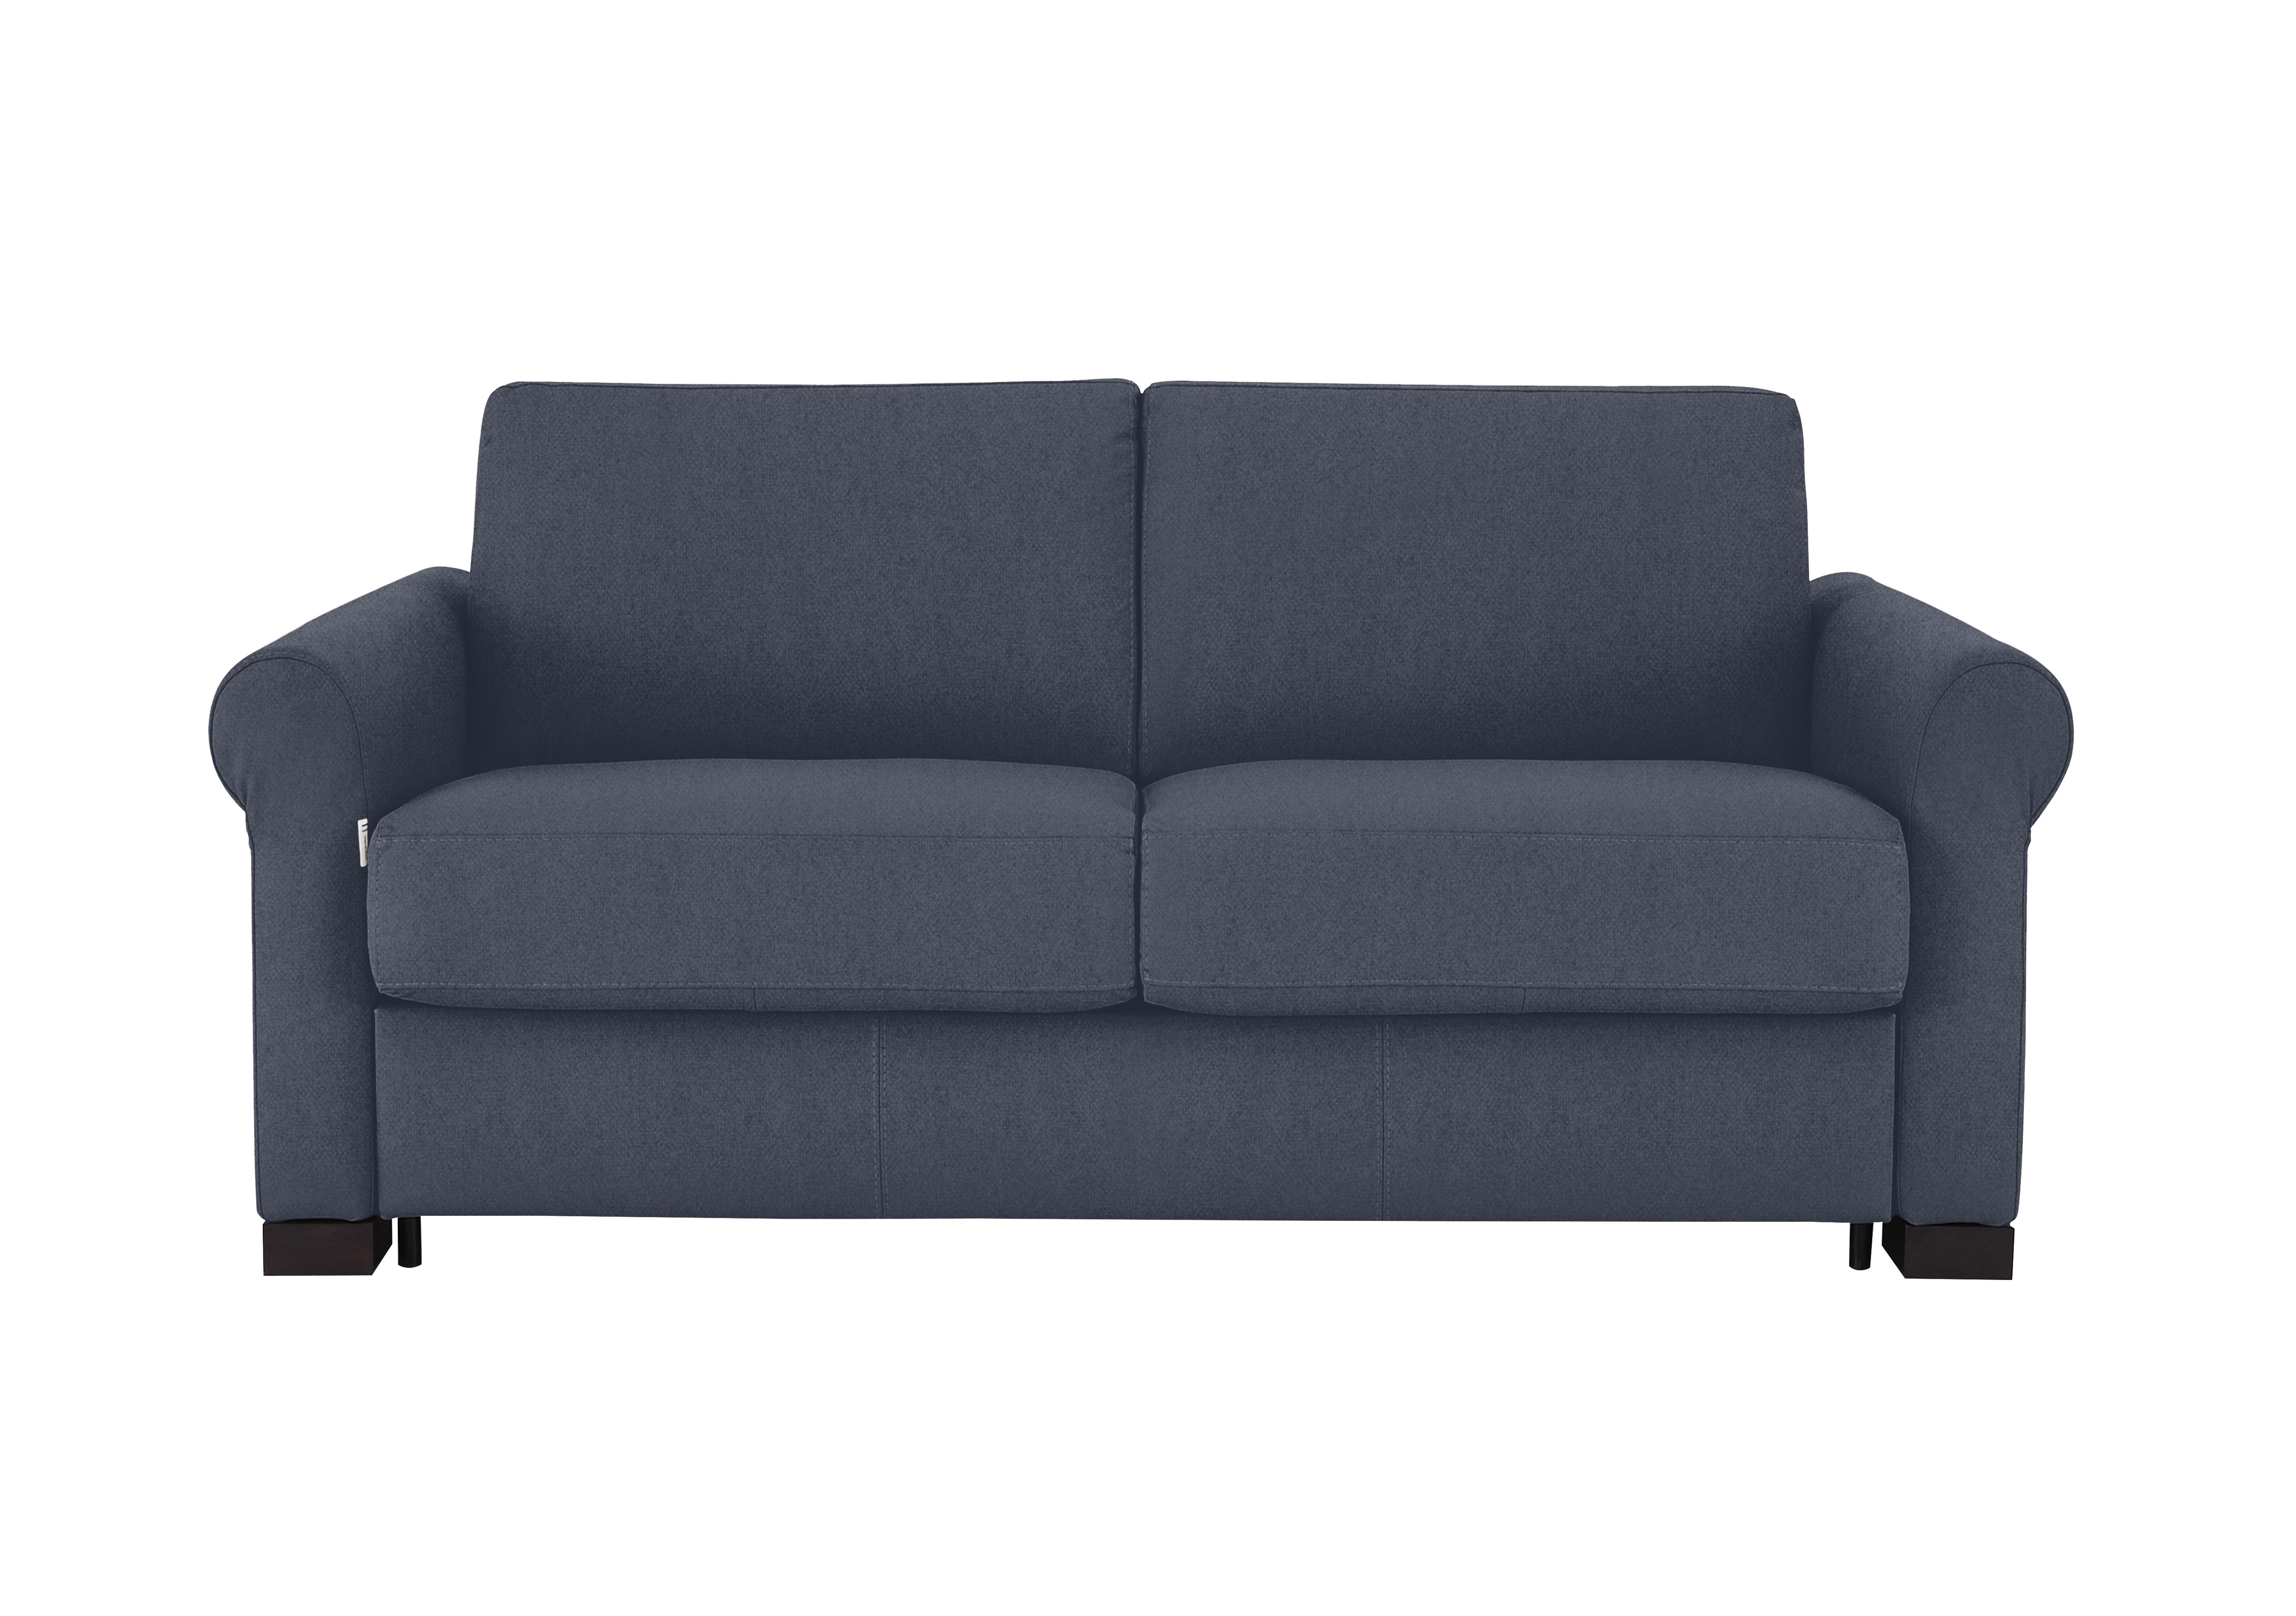 Alcova 2 Seater Fabric Sofa Bed with Scroll Arms in Fuente Ocean on Furniture Village